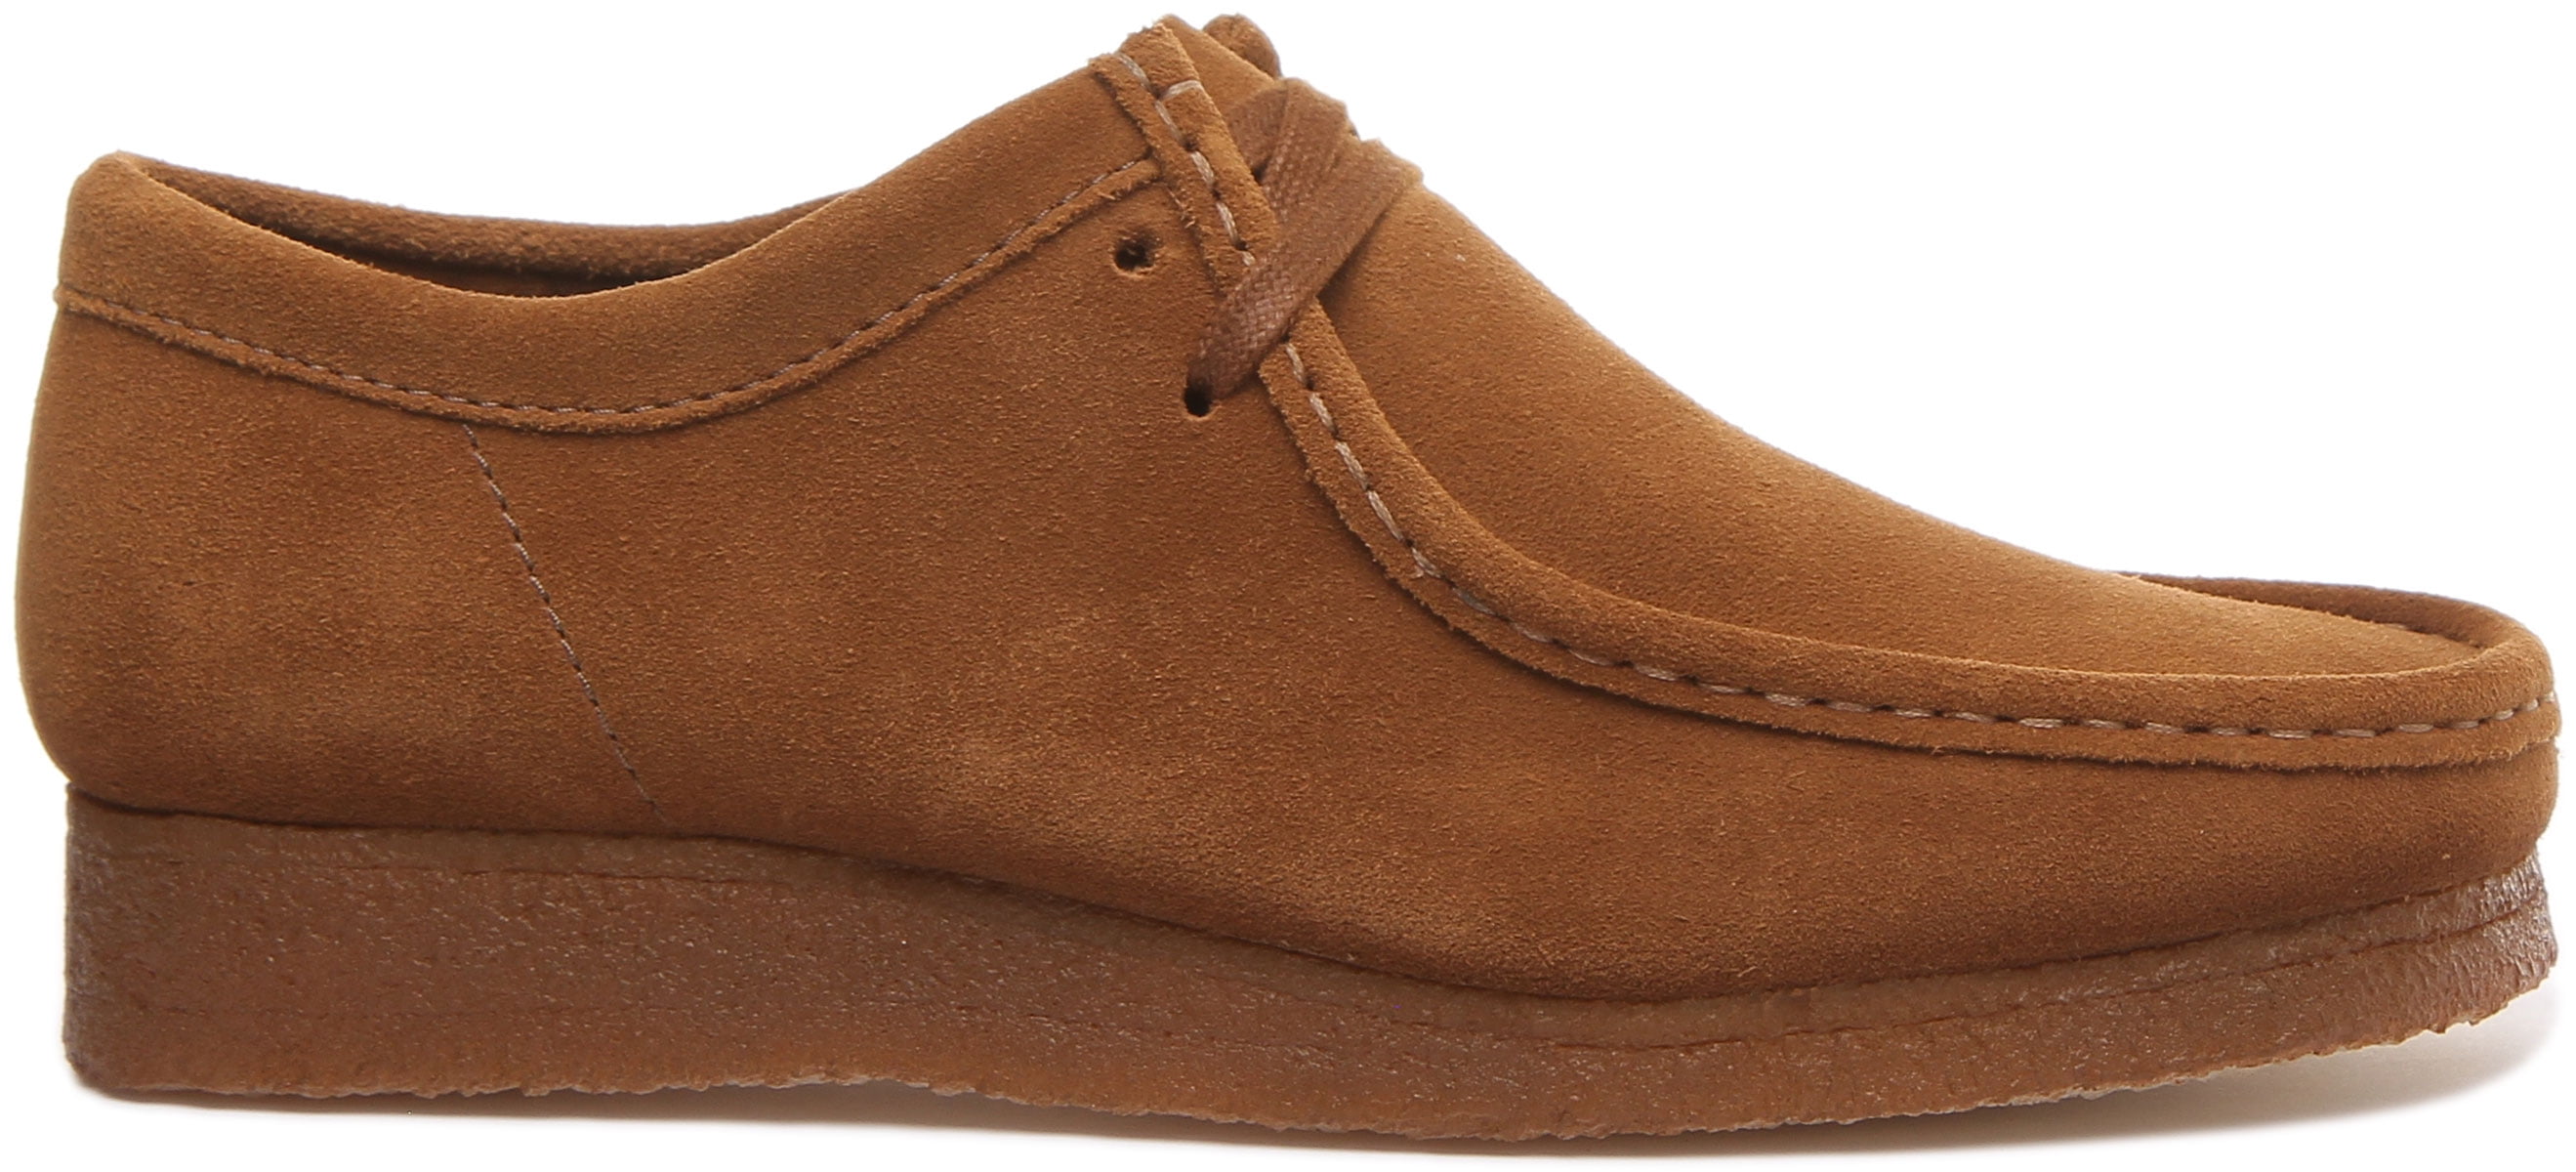 Clarks Wallabee Men's 2 Eyelet Lace Up Suede Shoes In Cola Size 8.5